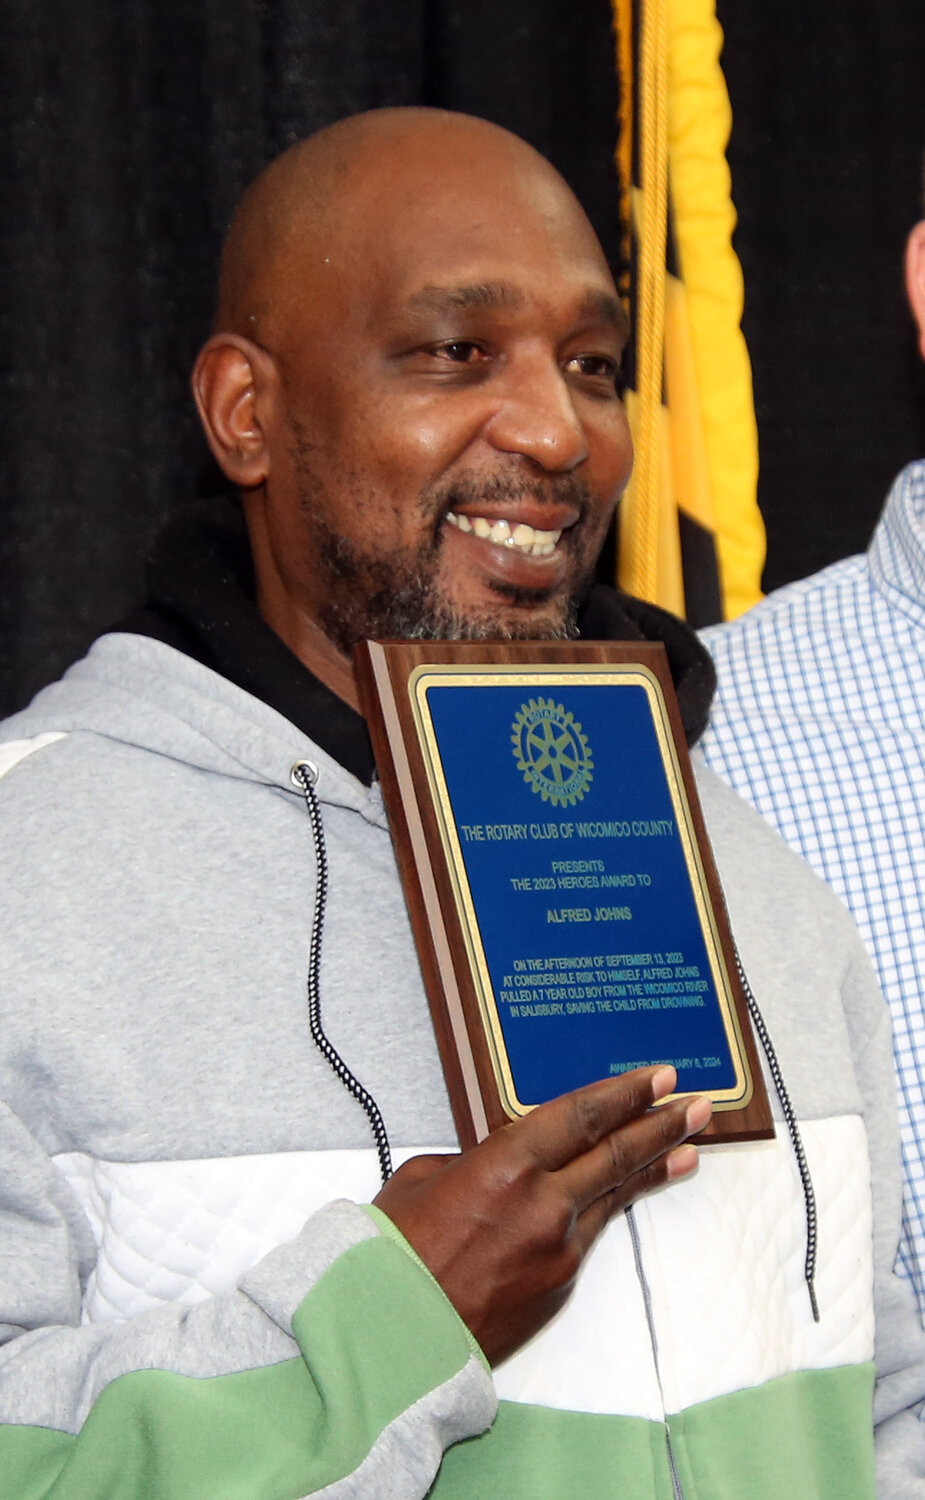 Alfred Johns show the plaque he received from the Rotary Club of Wicomico County. He was honored as a "Hero" for saving a 7-year-old boy who had fallen into the Wicomico River on Sept. 23 in Salisbury.